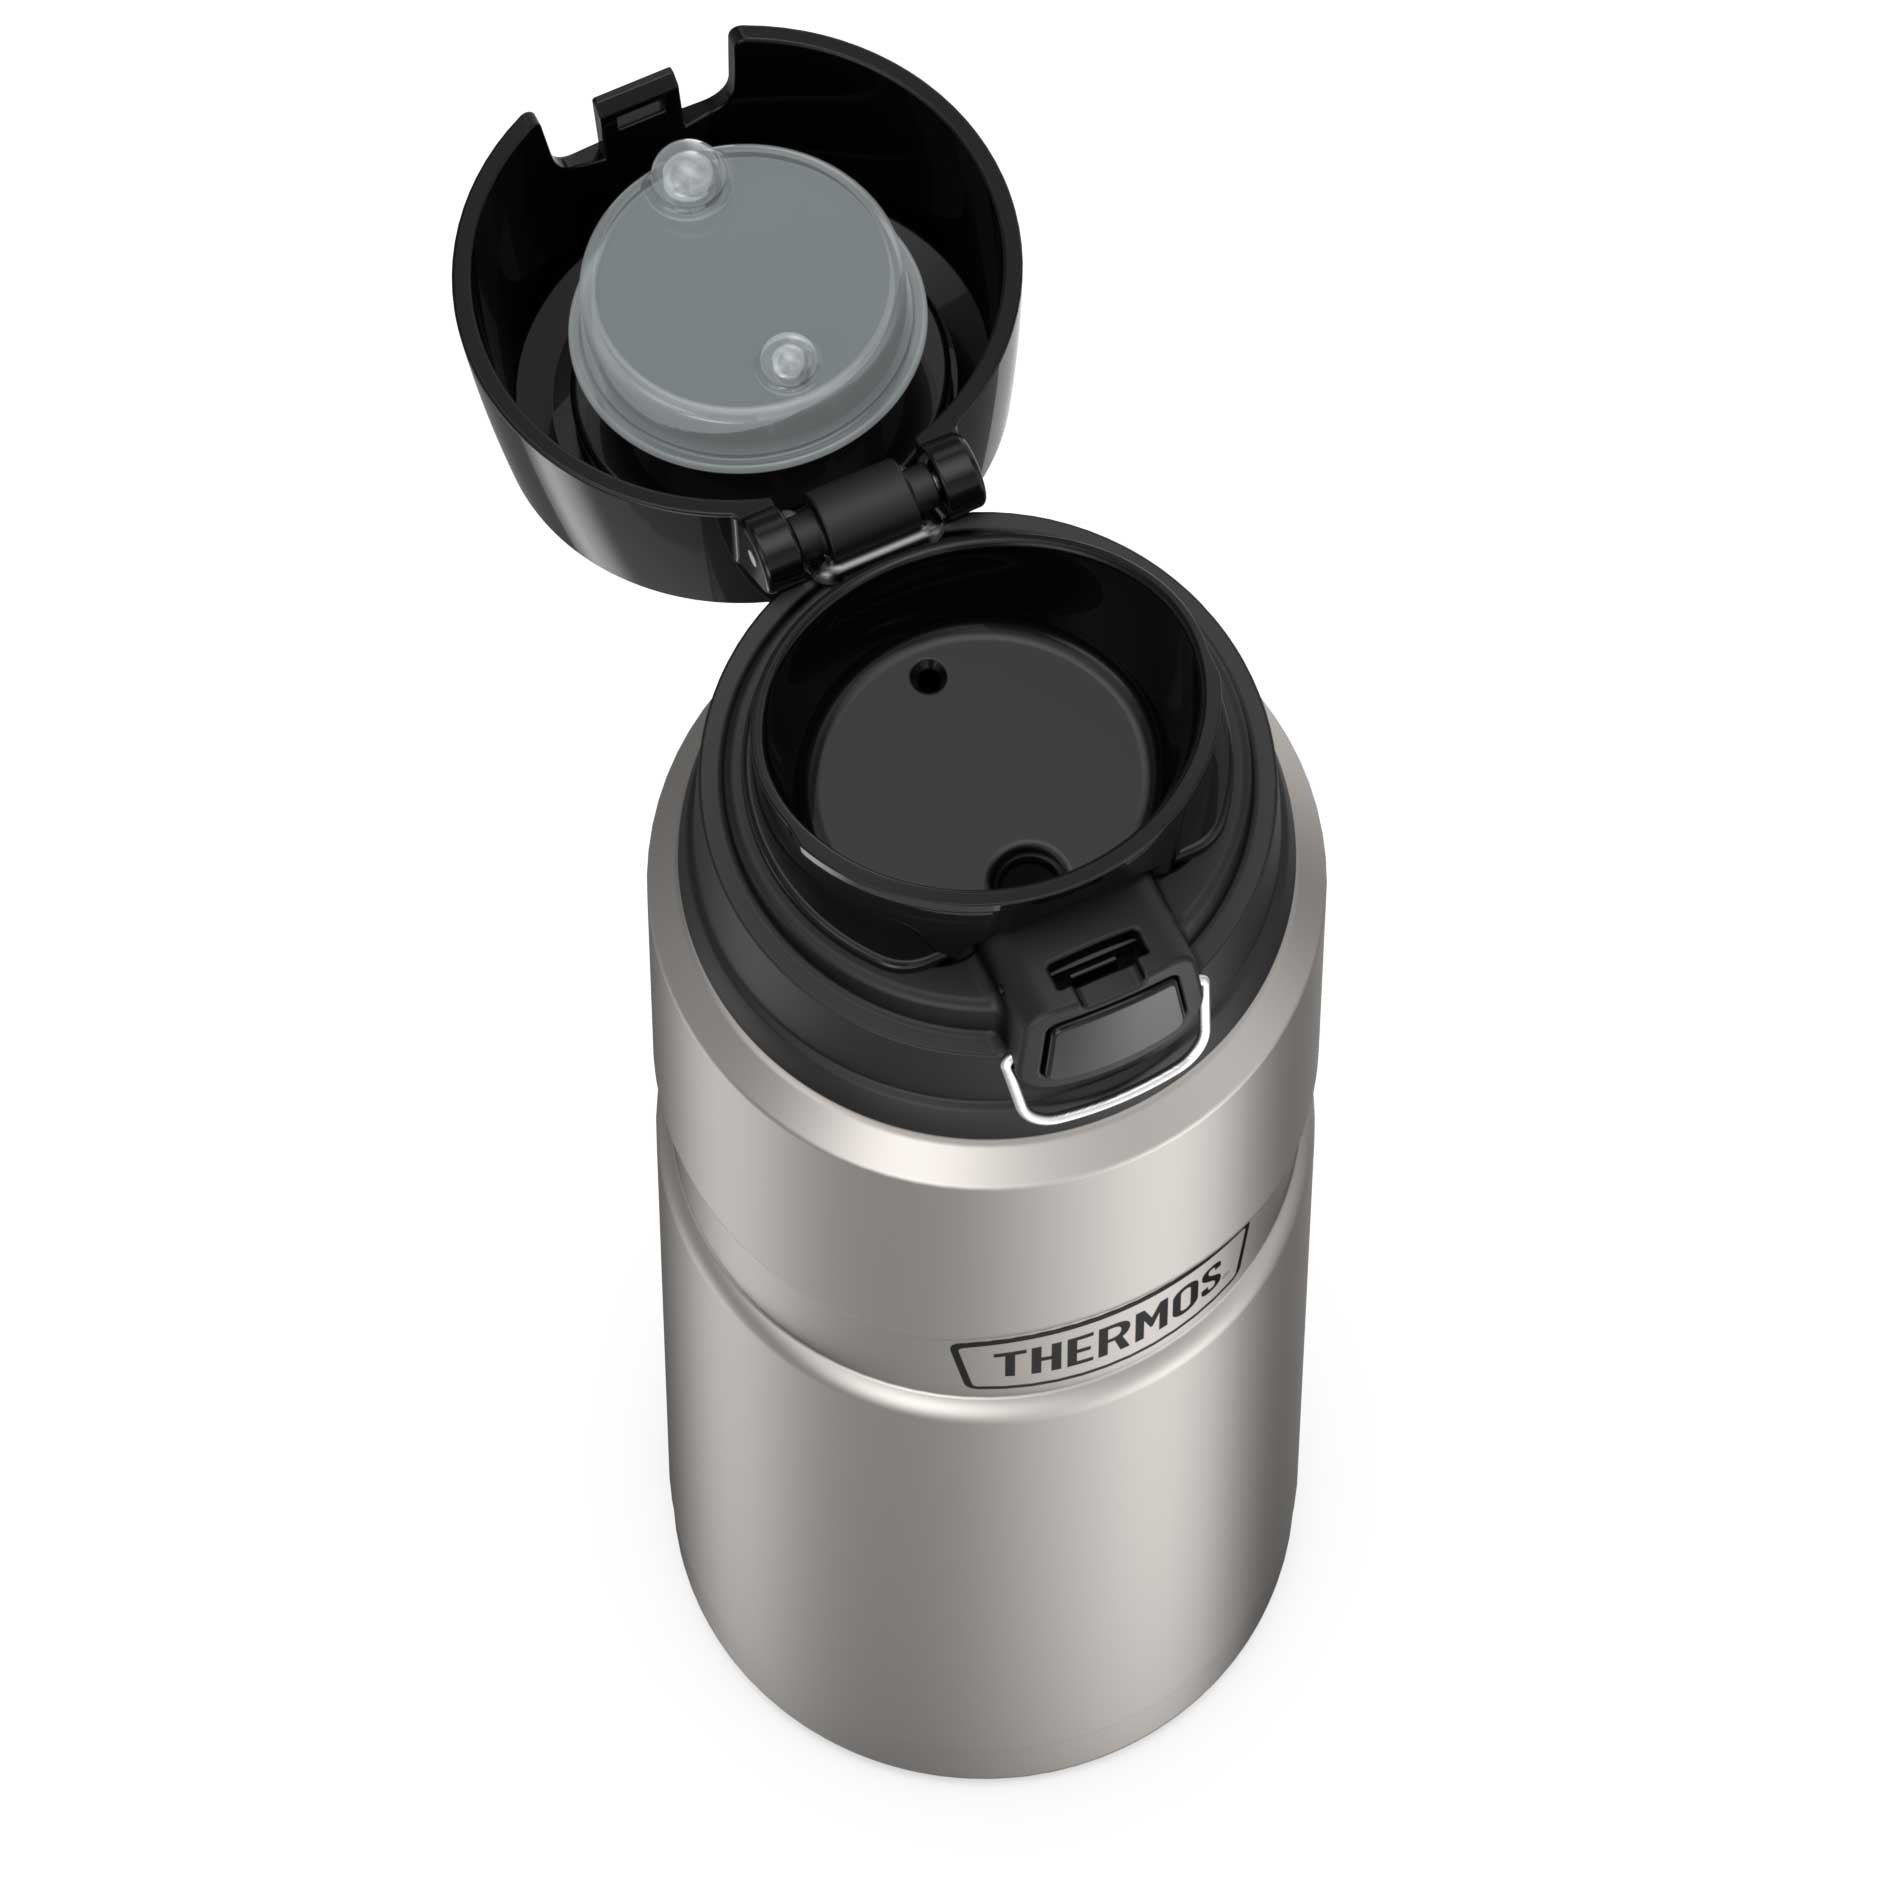 Thermos 40oz Stainless King Beverage Bottle - Midnight Blue